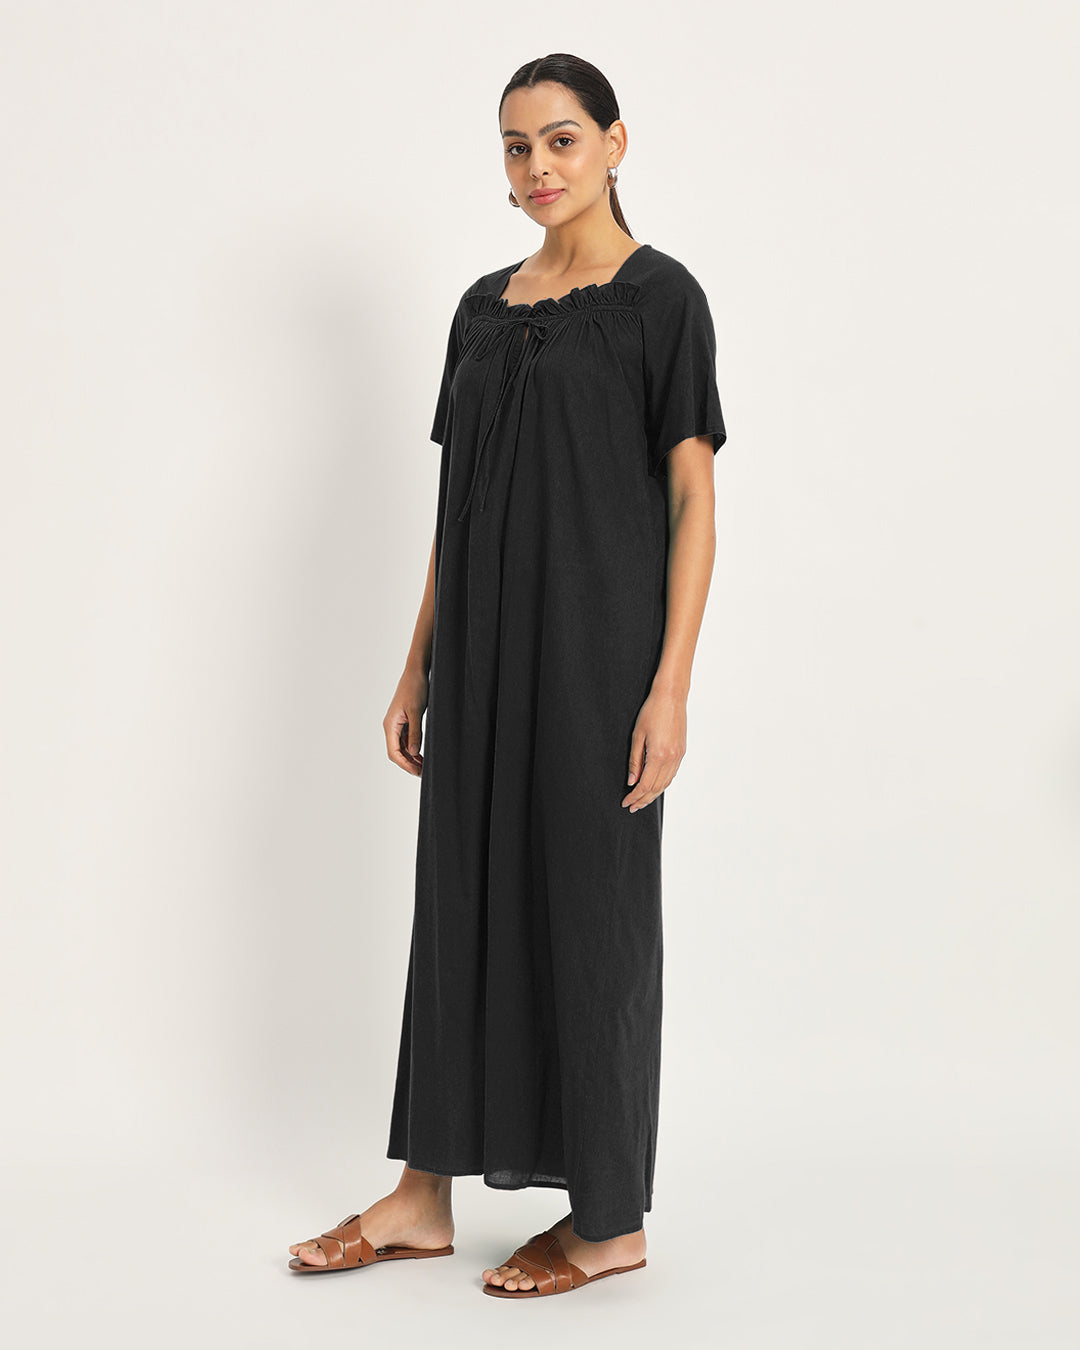 Combo: Classic Black & Sage Green Breathable Bliss Nightdress